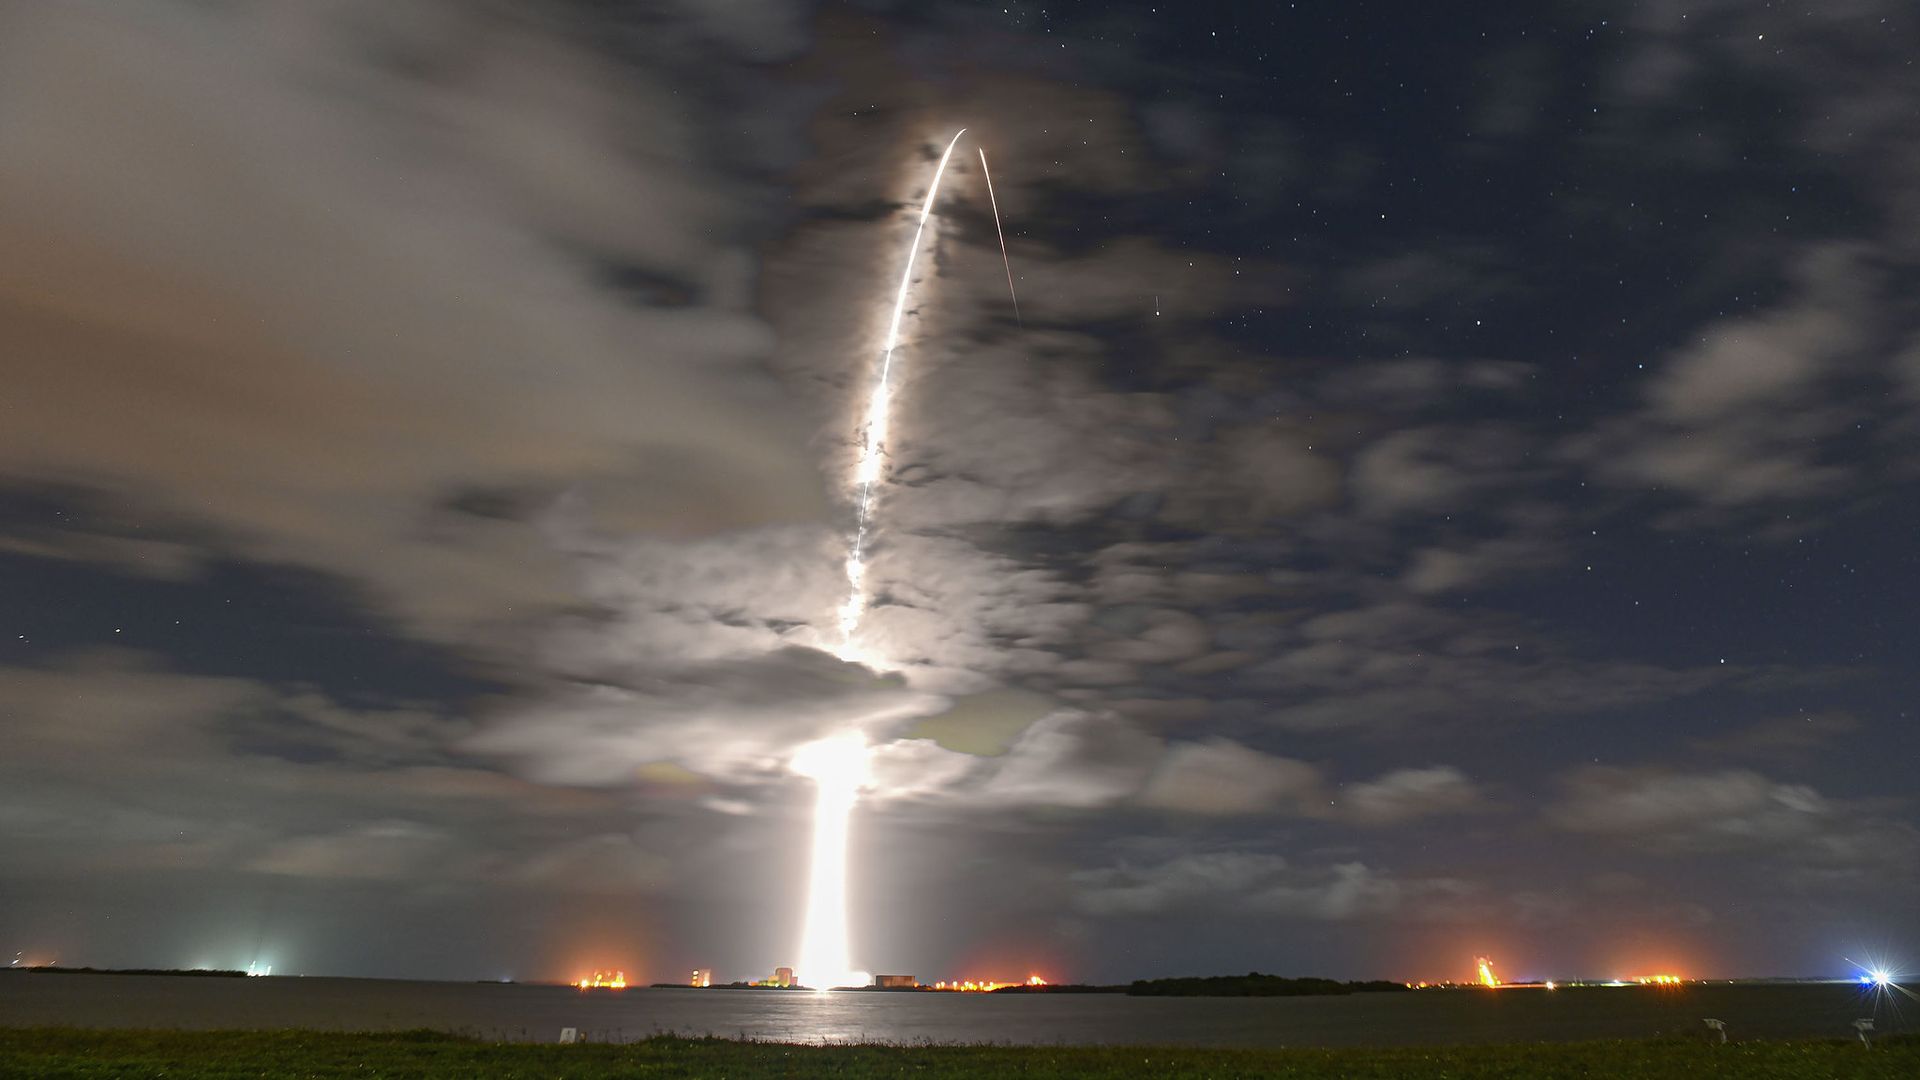 The streaking light of a SpaceX rocket launching at night